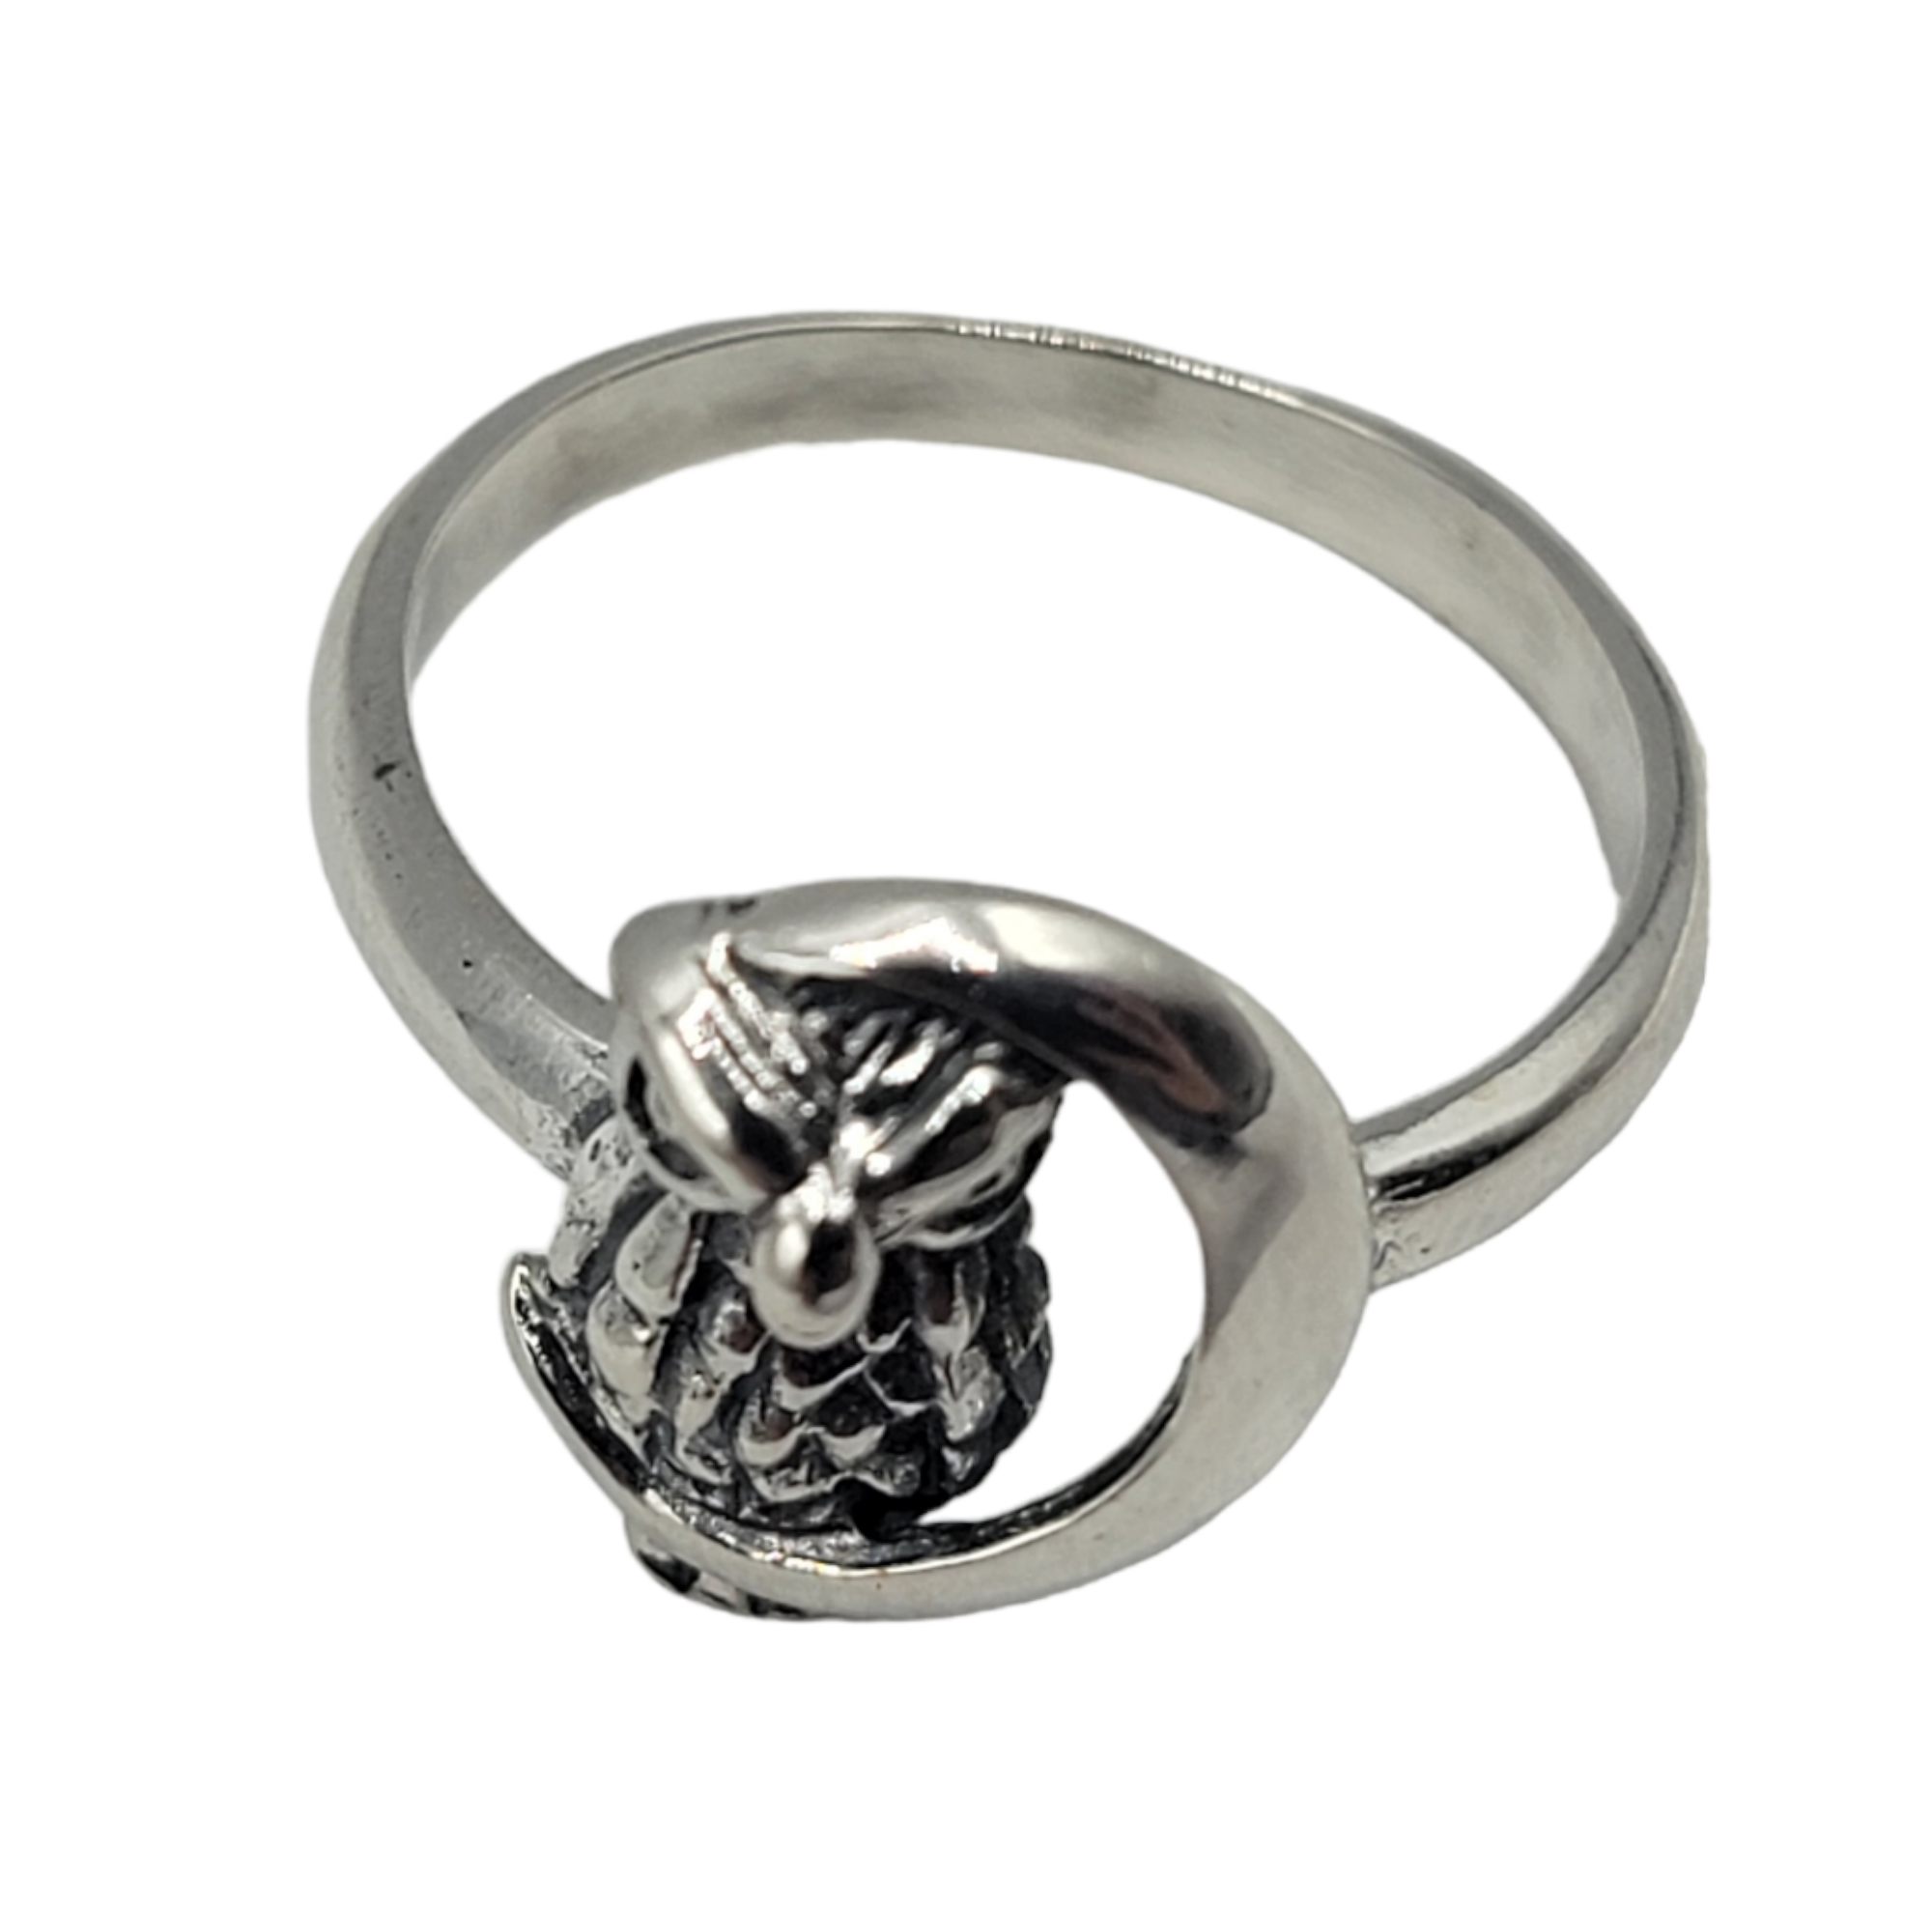 Owl .925 Sterling Silver Ring- ONLY 1 LEFT SIZE 6 - Travelers Trade Post